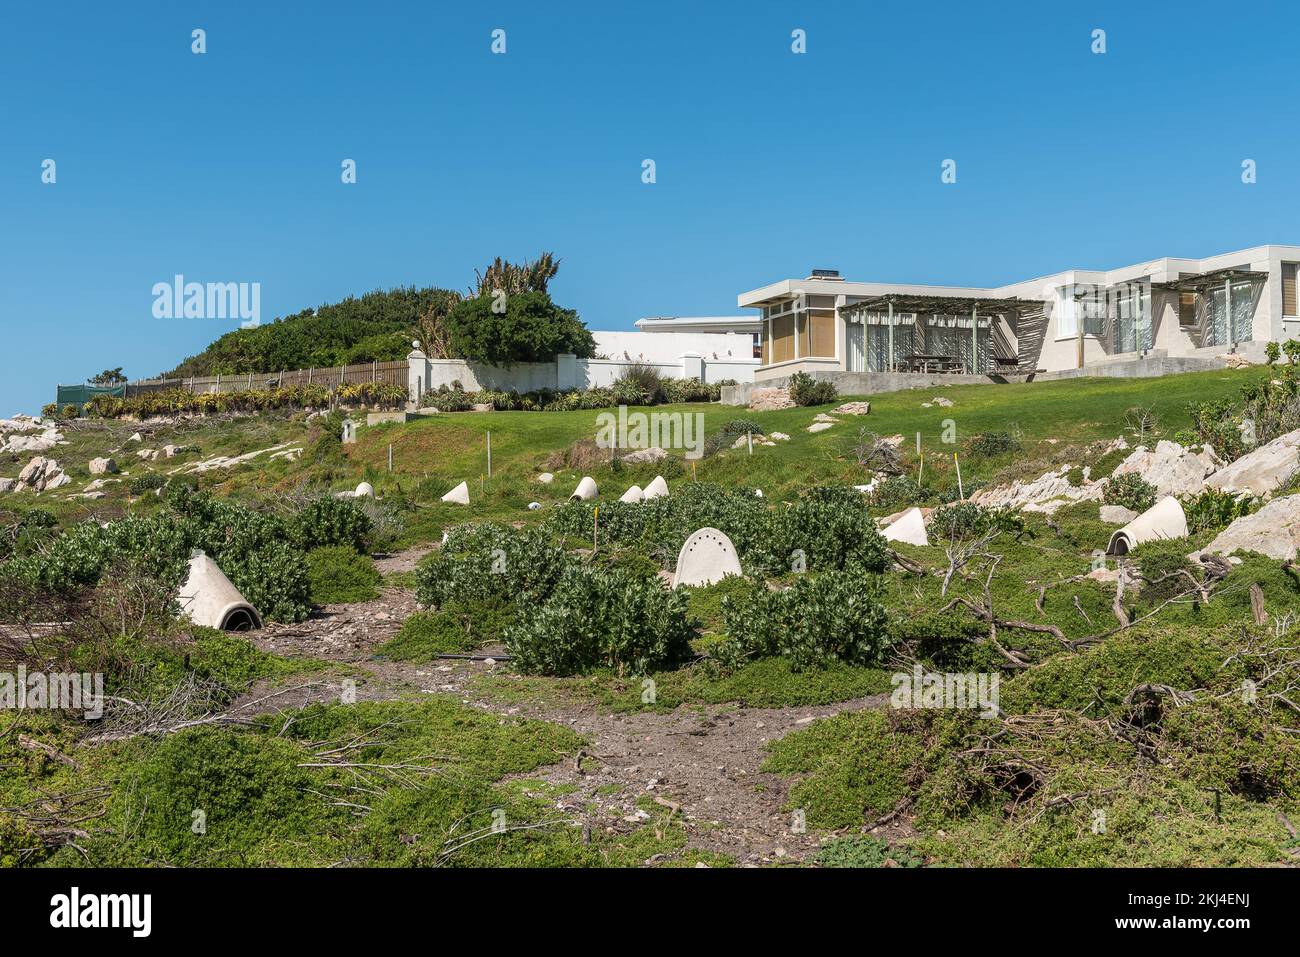 Bettys Bay, South Africa - Sep 20, 2022: Artificial African Penguin nests in Stony Point Nature Reserve in Bettys Bay. Houses are visible on the borde Stock Photo